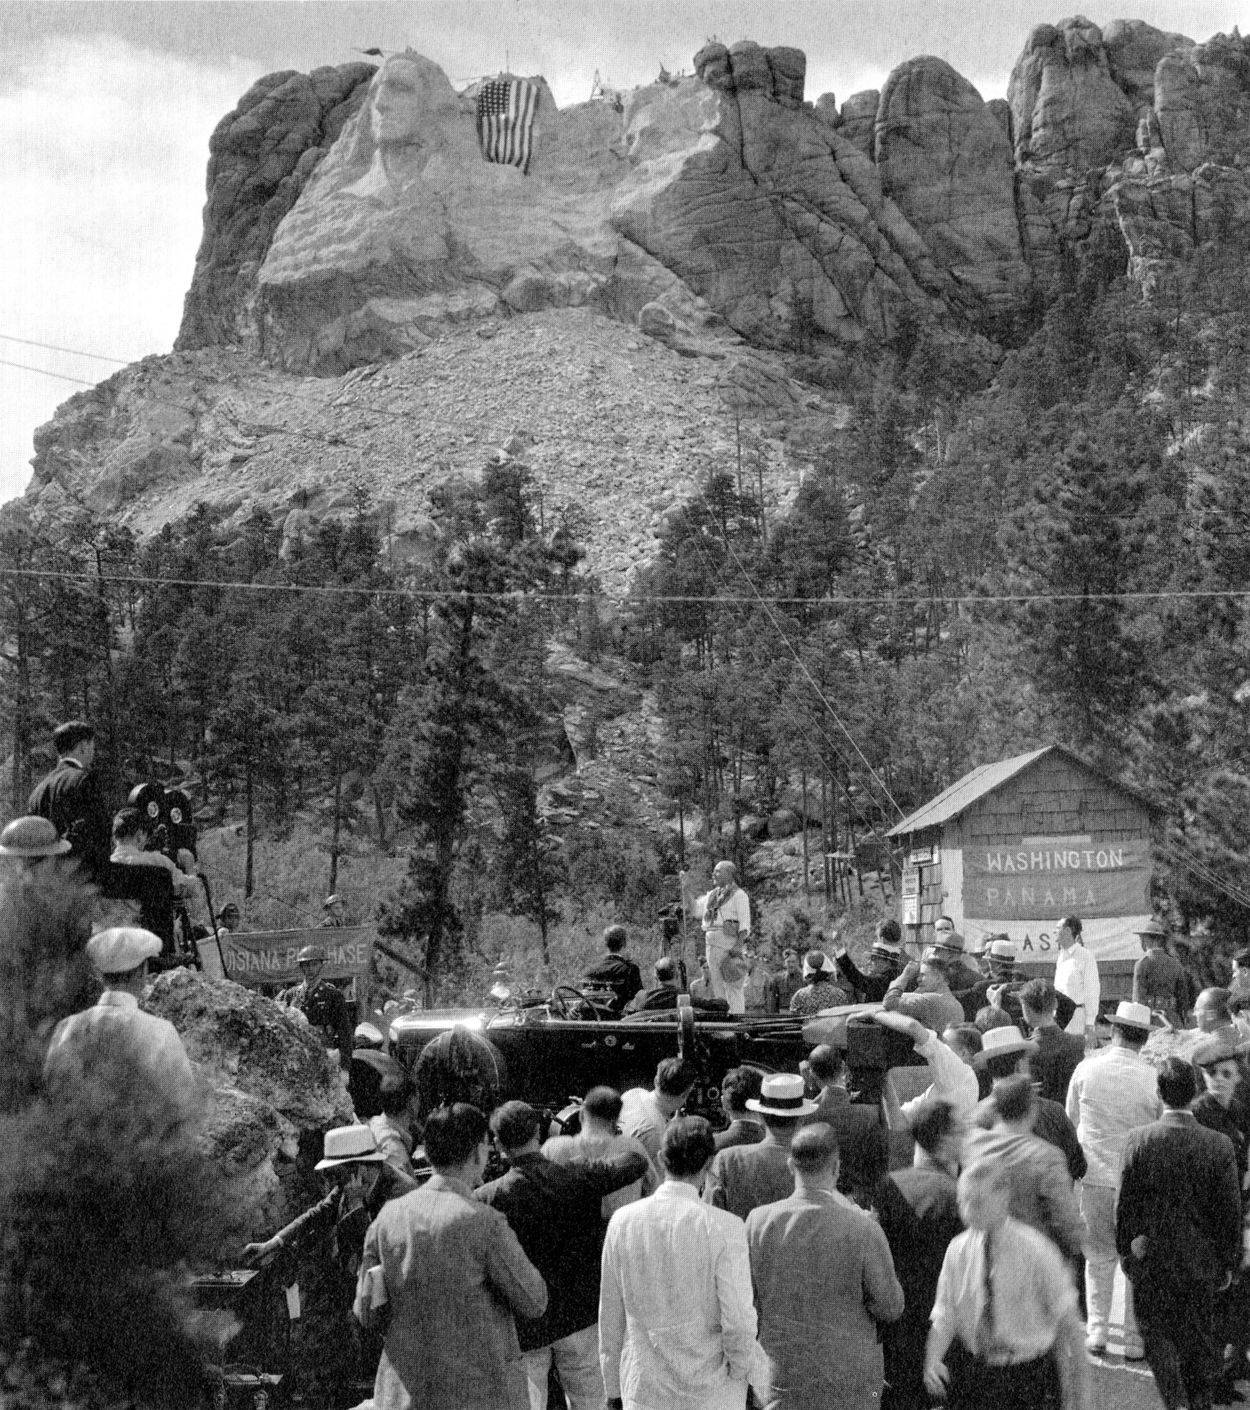 FDR at Mount Rushmore 1936